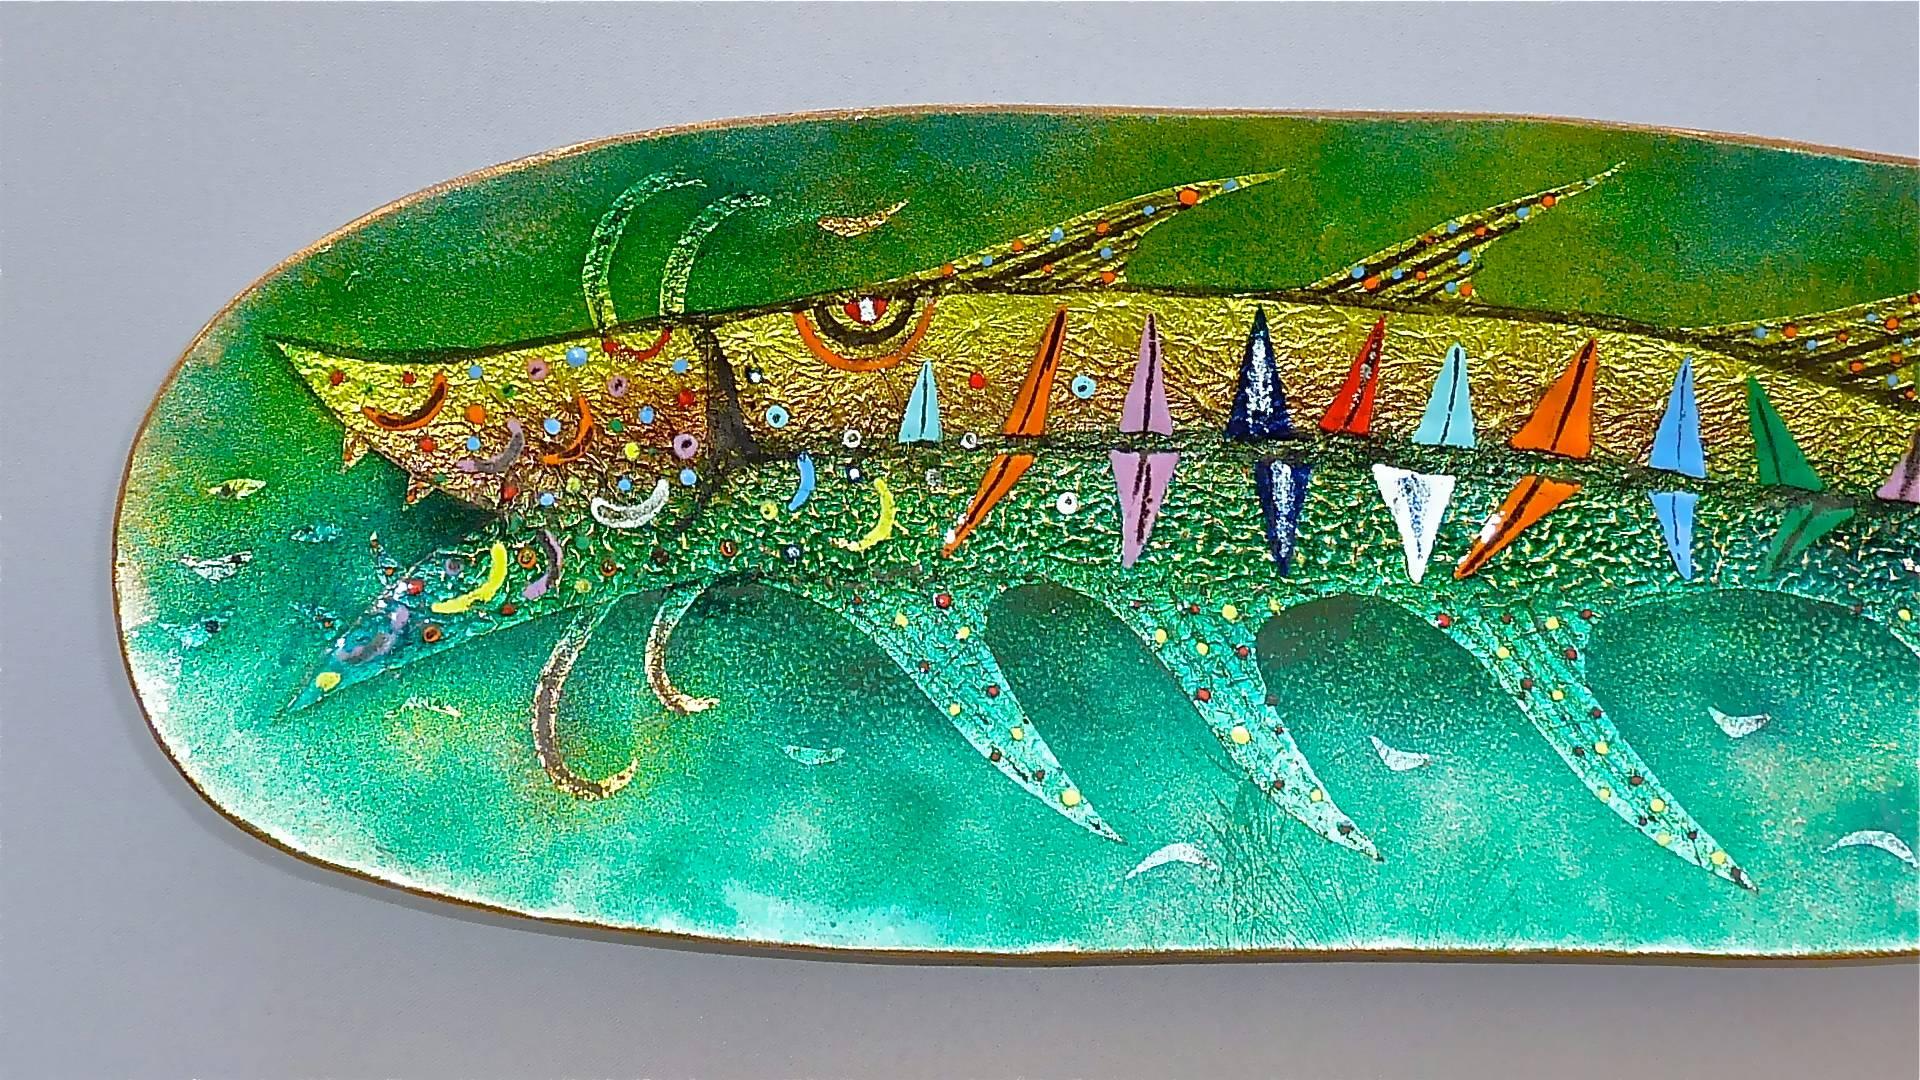 A heavy, elongated colorful enamel on copper bowl with fish motive as wall decoration or to put on a table possibly designed by Paolo De Poli or circle, Italy 1950s. The enamel colors used in the front are green, red, blue, orange, yellow, blue and